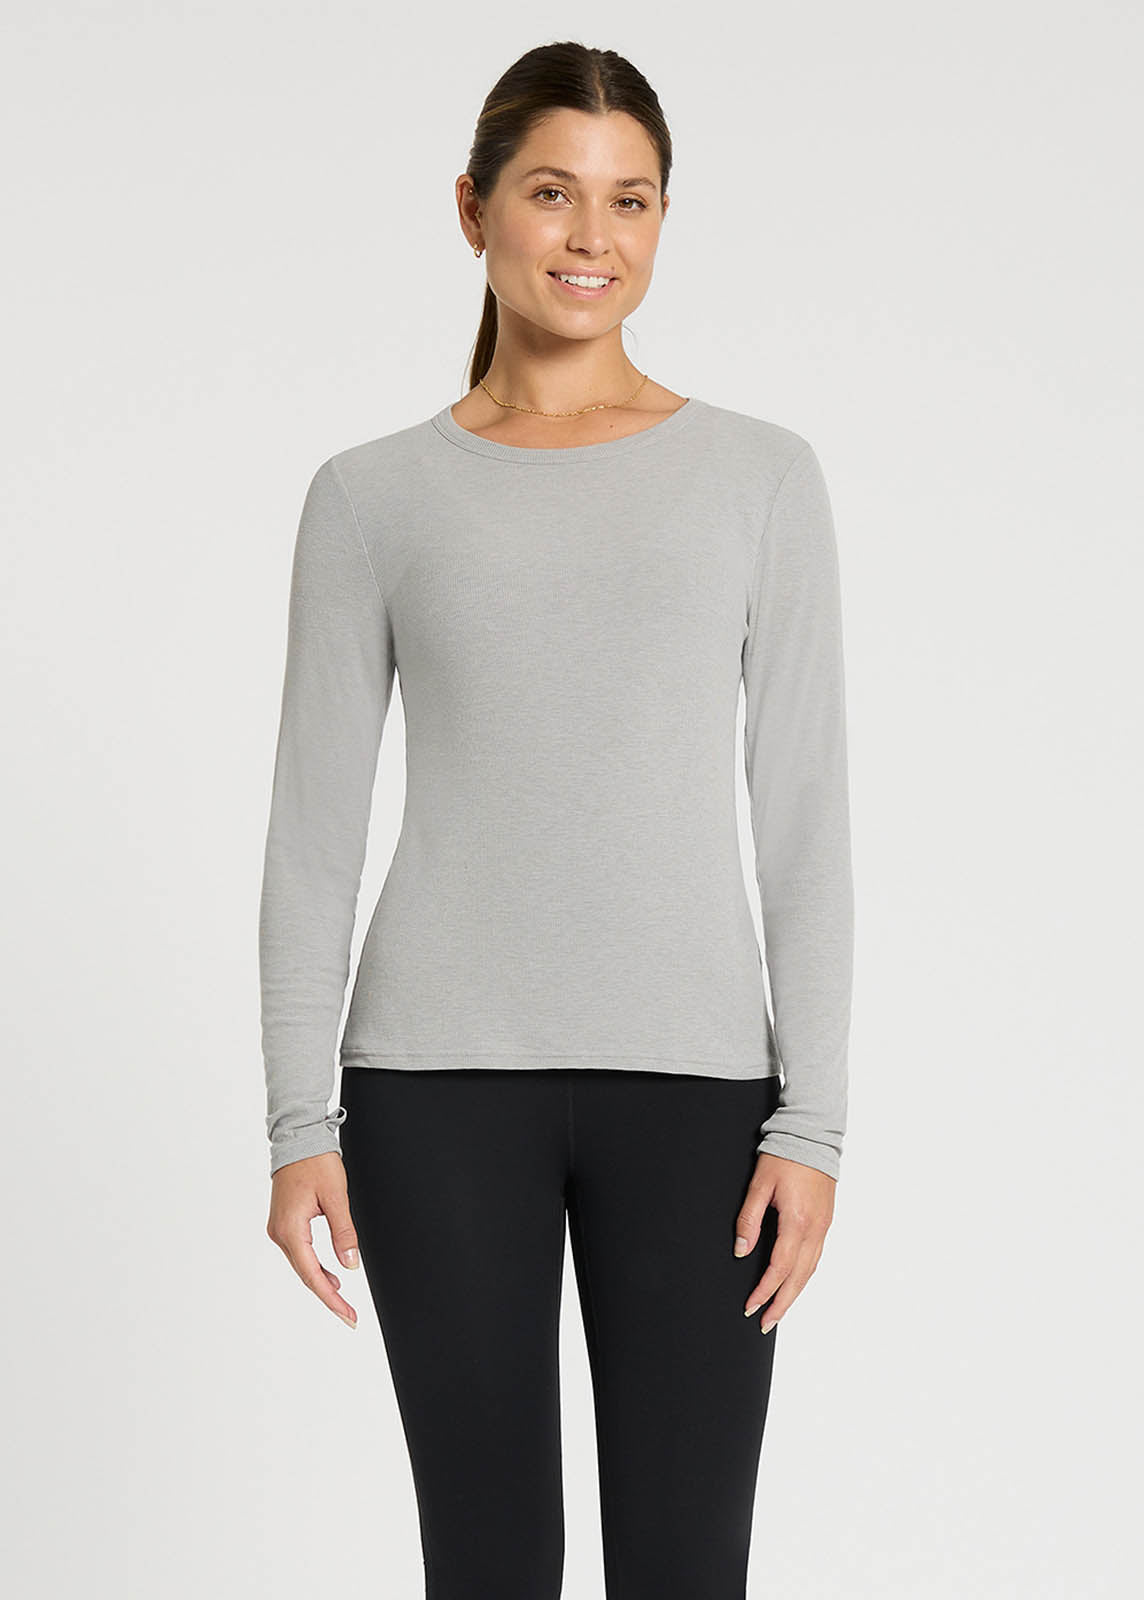 Buy CakCton Womens Tops Long Sleeve Shirt for Women Running Yoga Tops  Athletic Sports Breathable Gym Workout T Shirt Online at  desertcartSeychelles